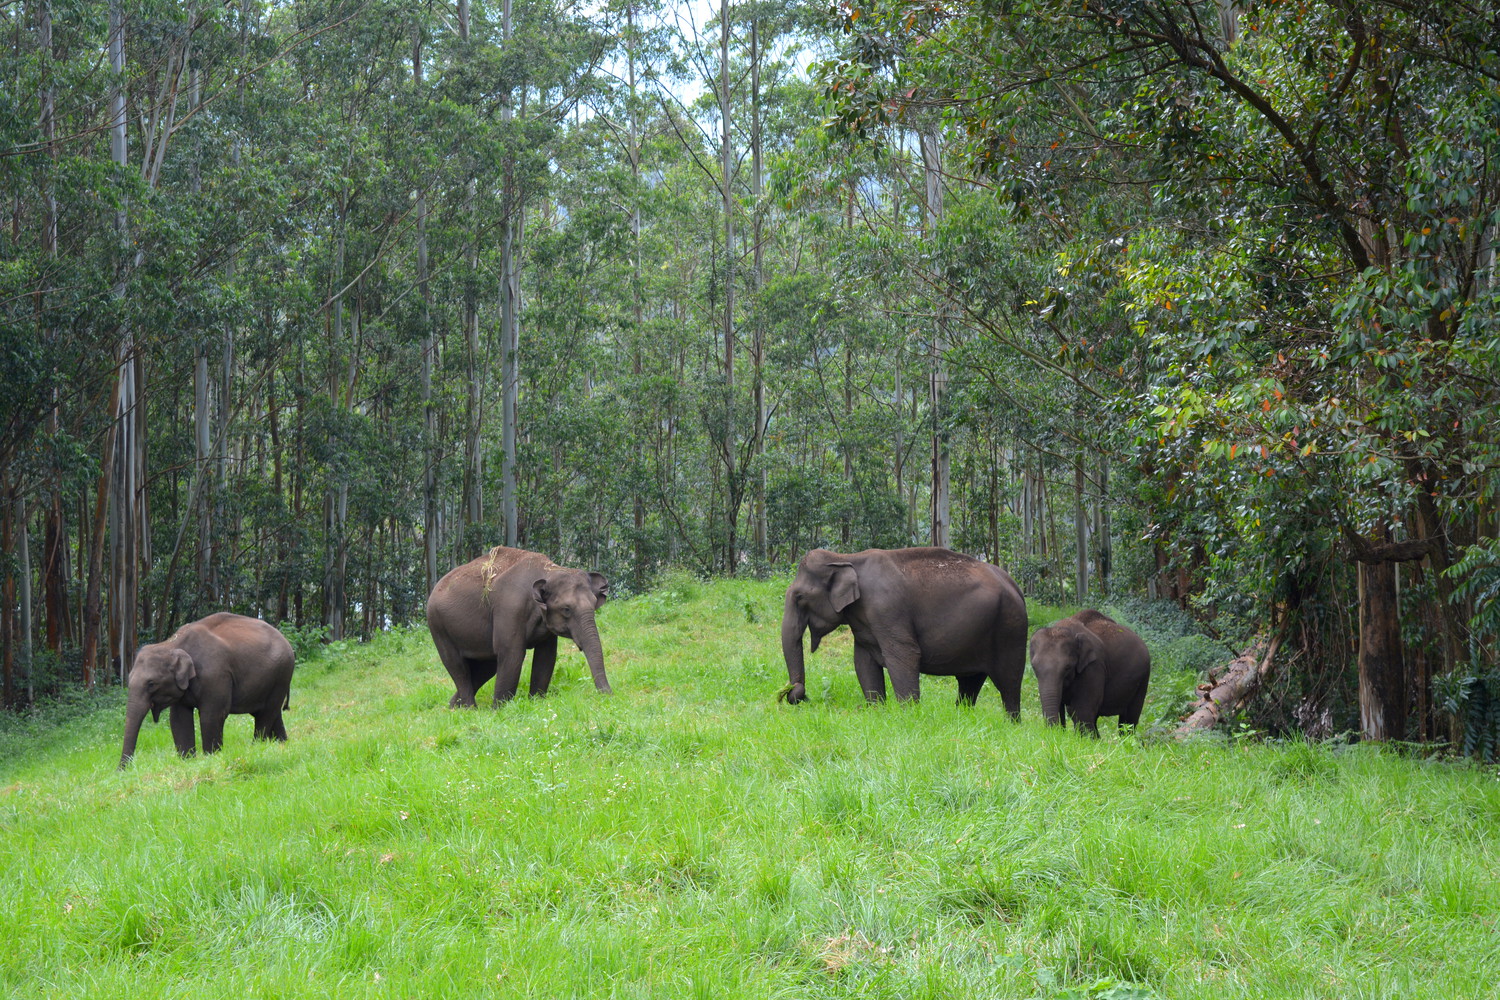 Four elephants grazing in a field surrounded by trees